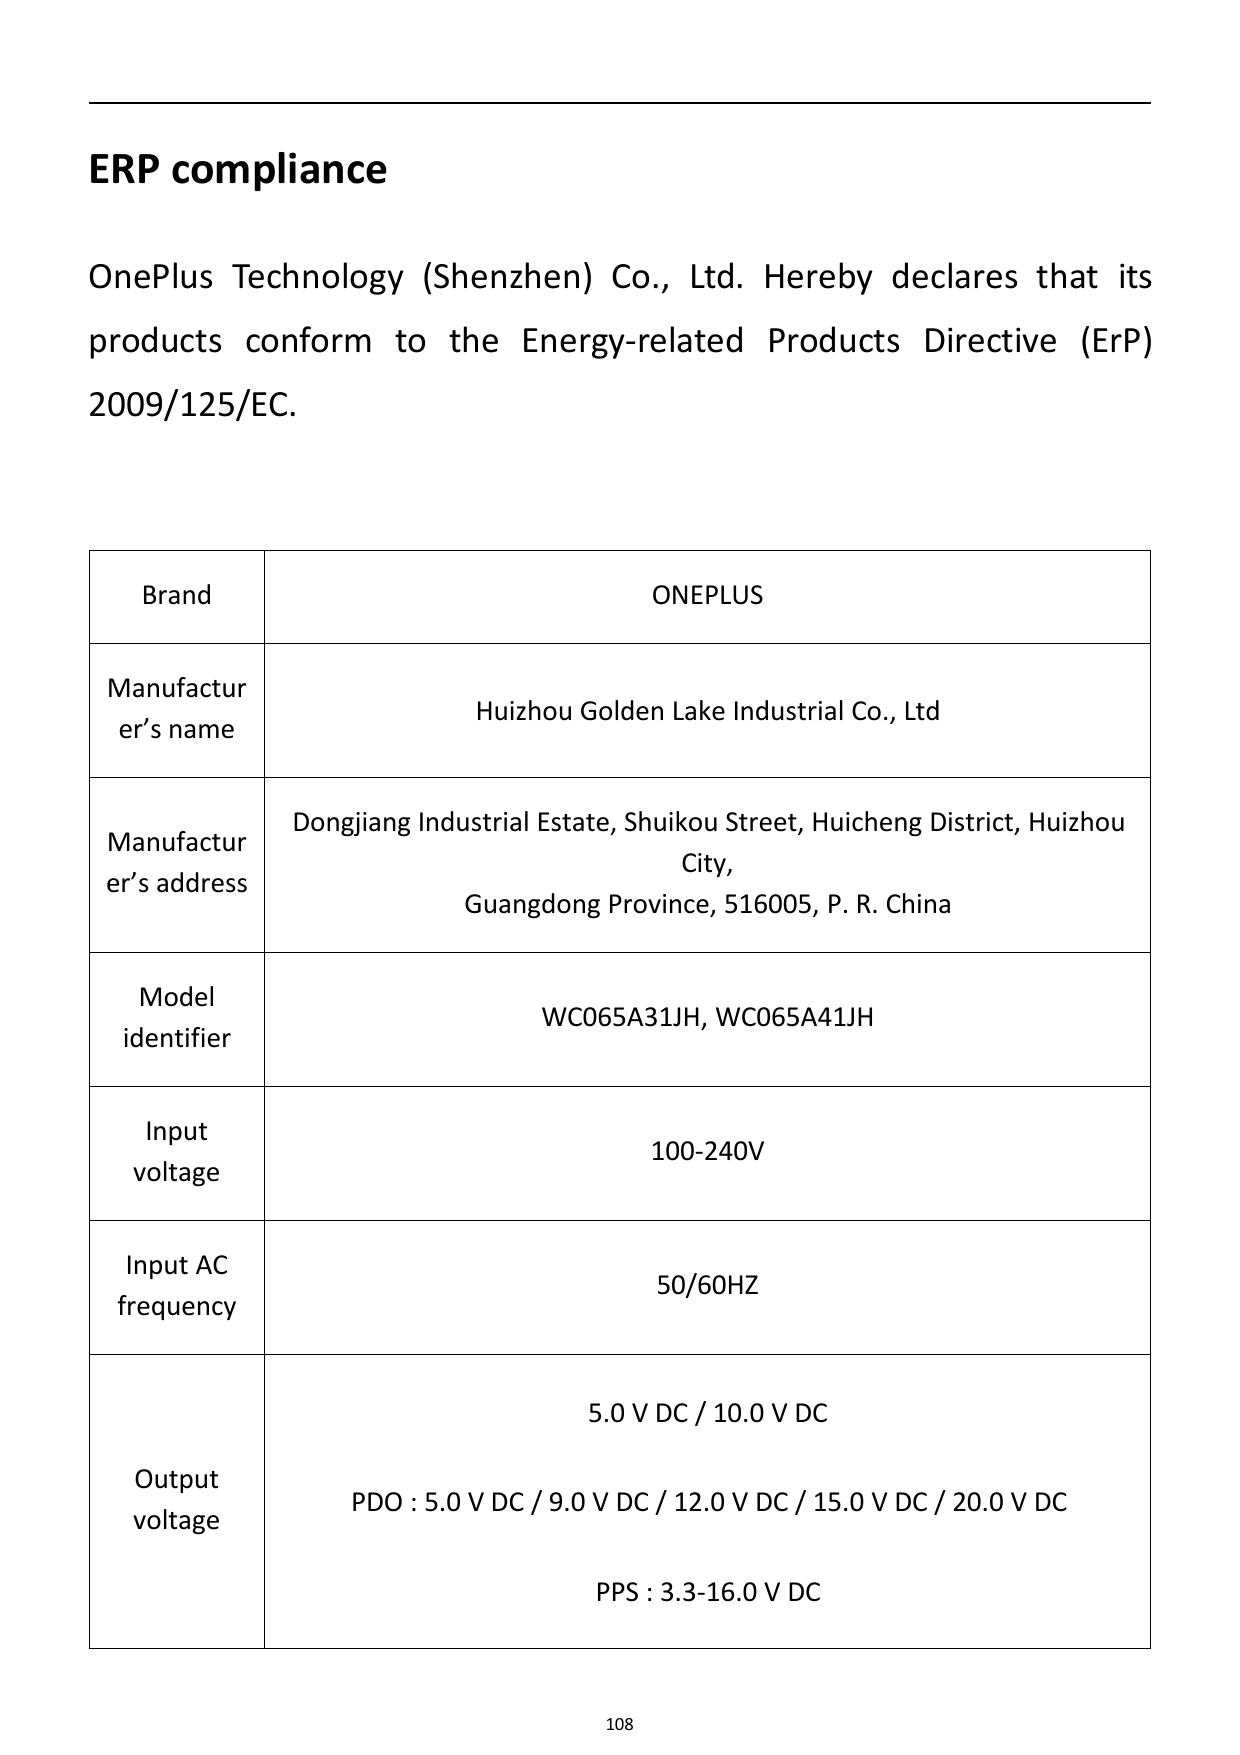 ERP complianceOnePlus Technology (Shenzhen) Co., Ltd. Hereby declares that itsproducts conform to the Energy-related Products Di